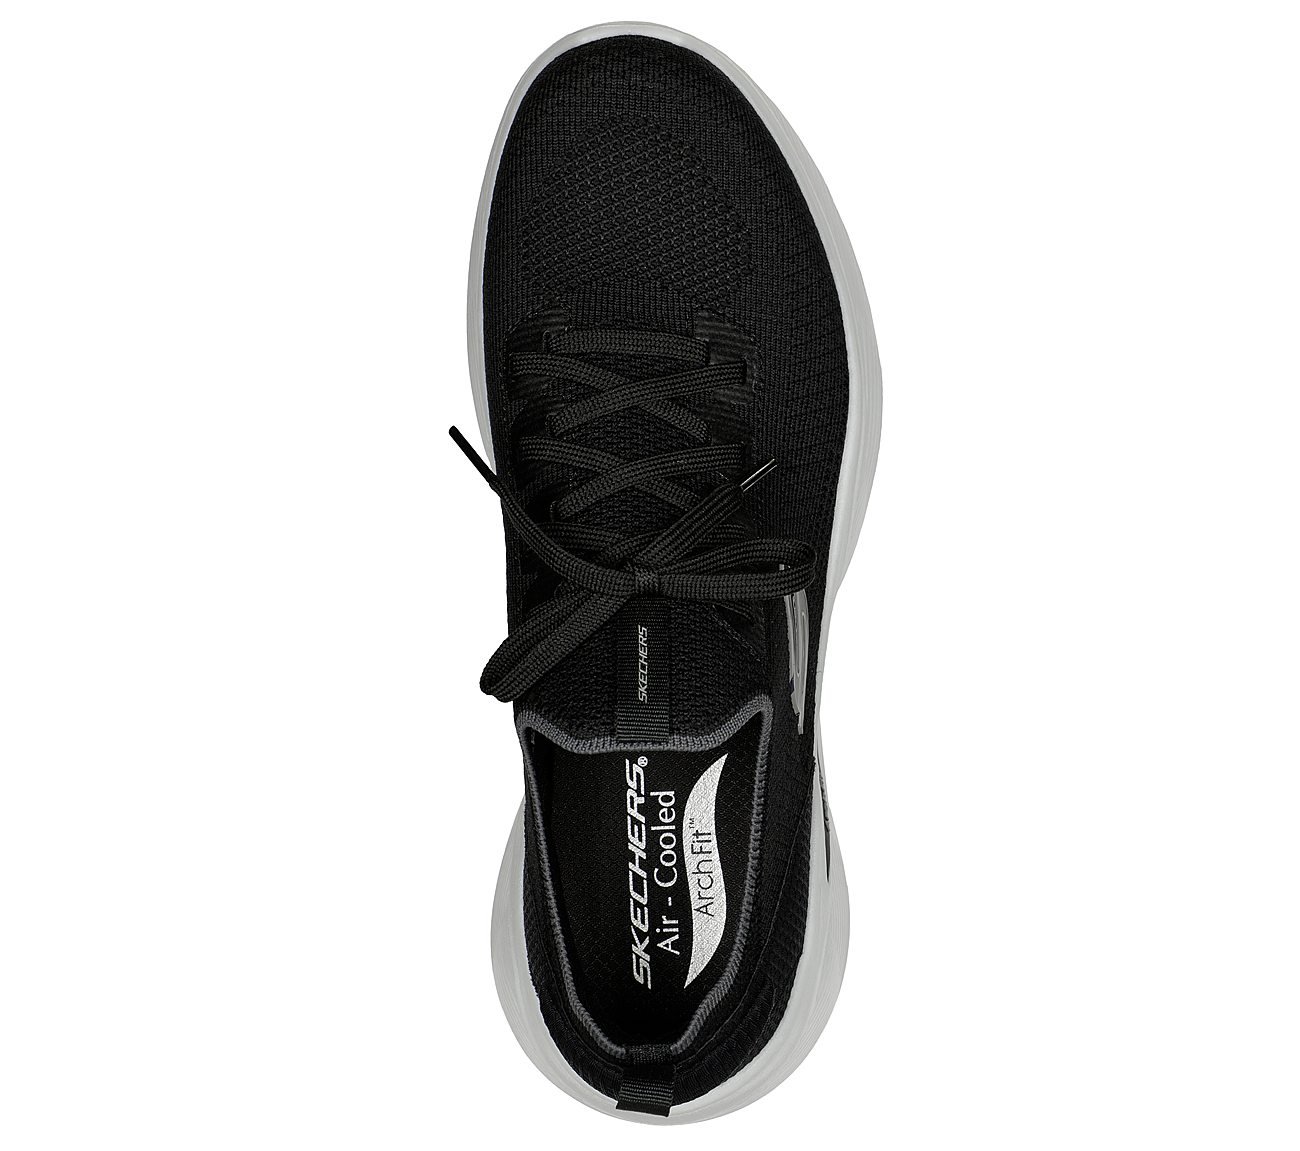 ARCH FIT INFINITY - STORMLIGH, BLACK/GREY Footwear Top View